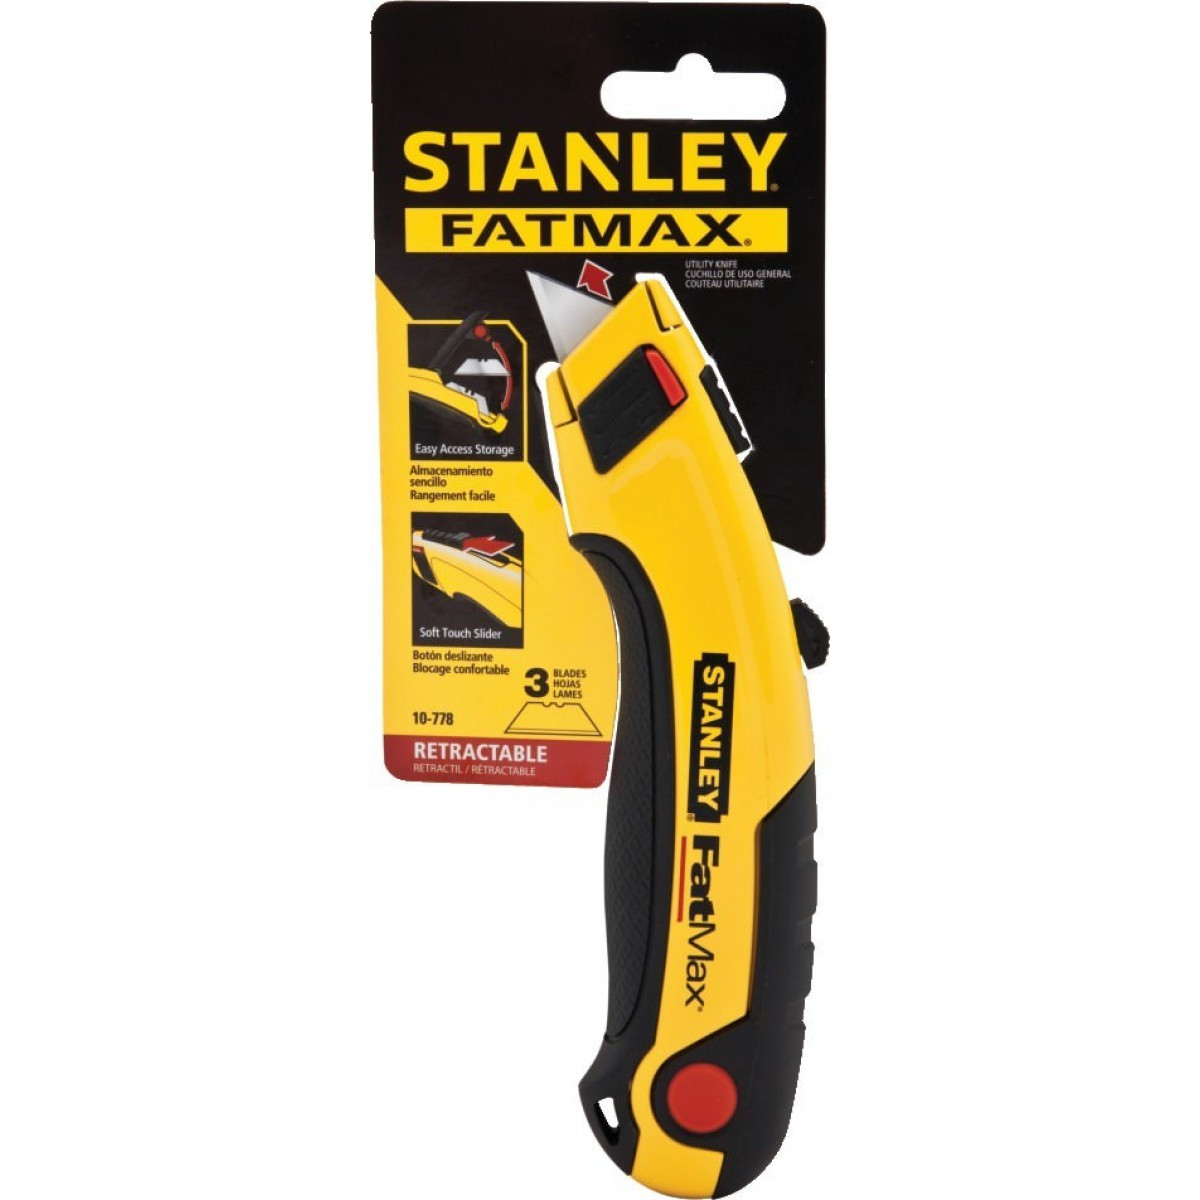 CUTTER STANLEY FAT MAX TRAPEZOIDAL 10-778